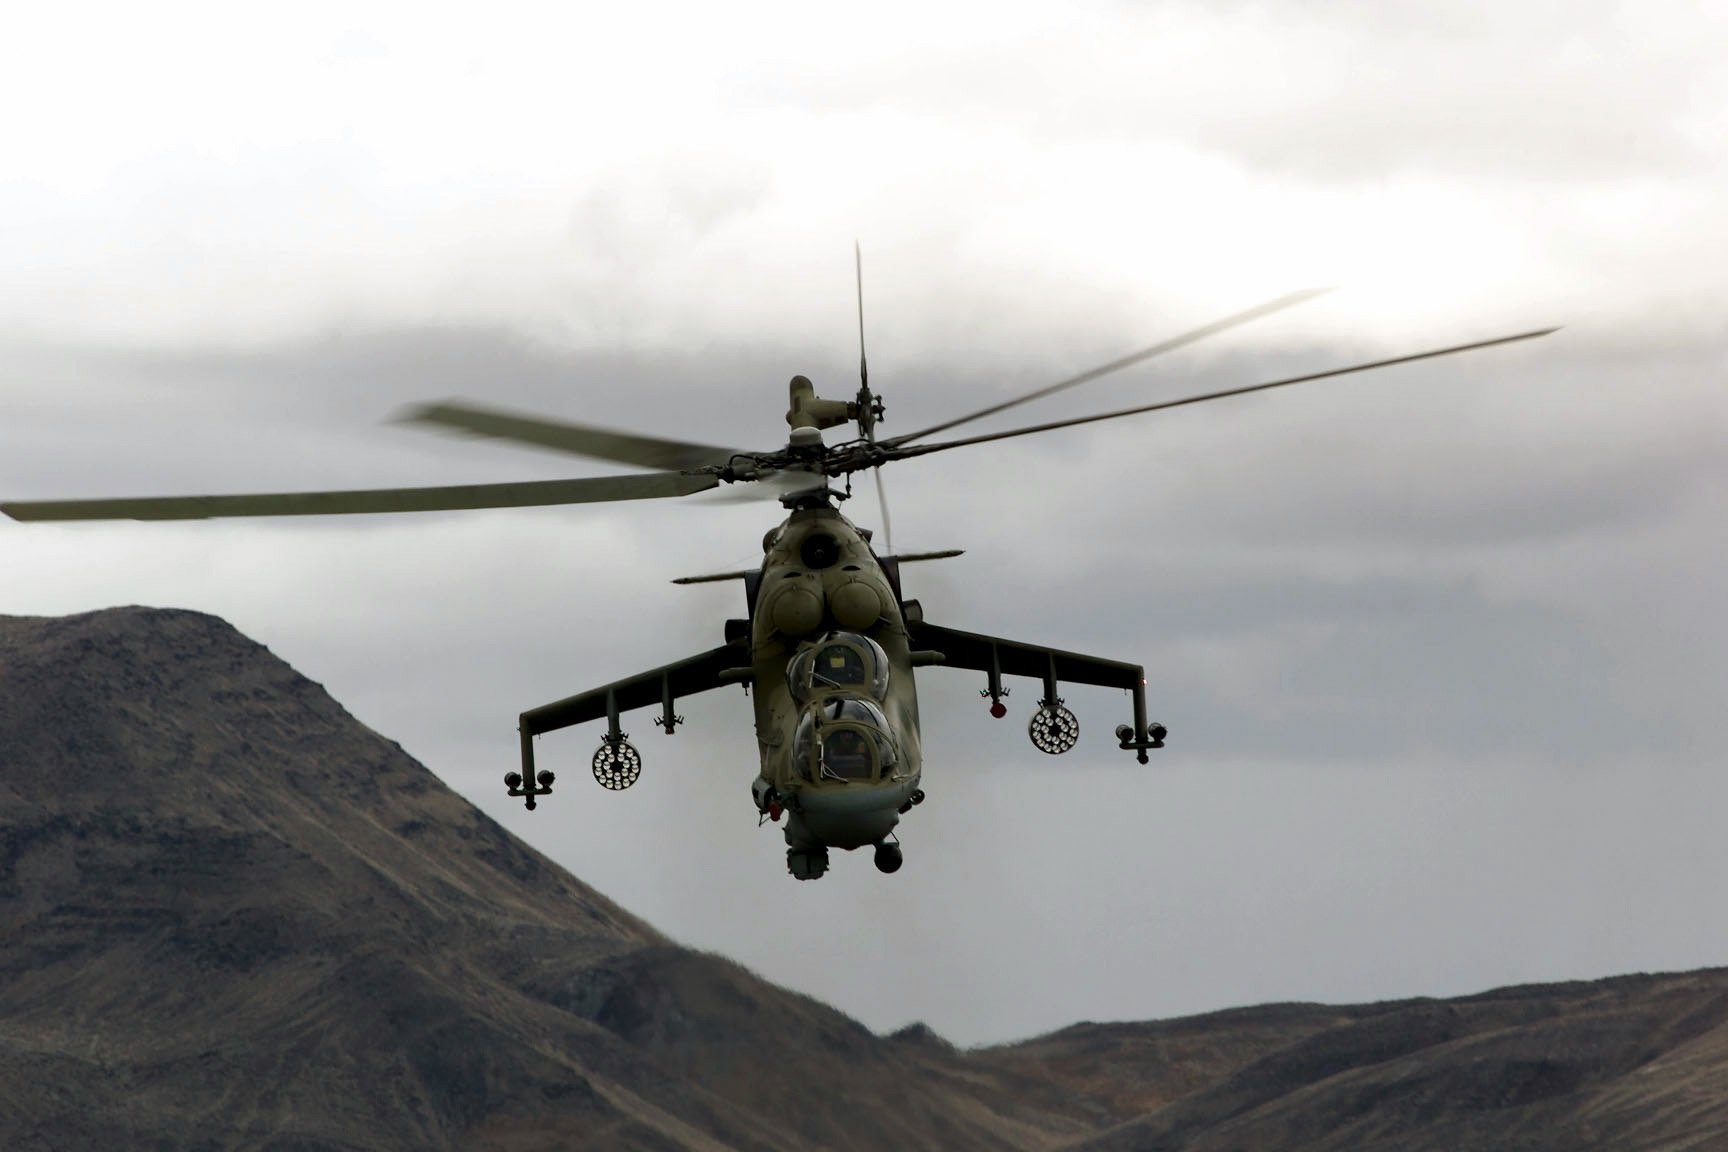 mi 24, Hind, Gunship, Russian, Russia, Military, Weapon, Helicopter